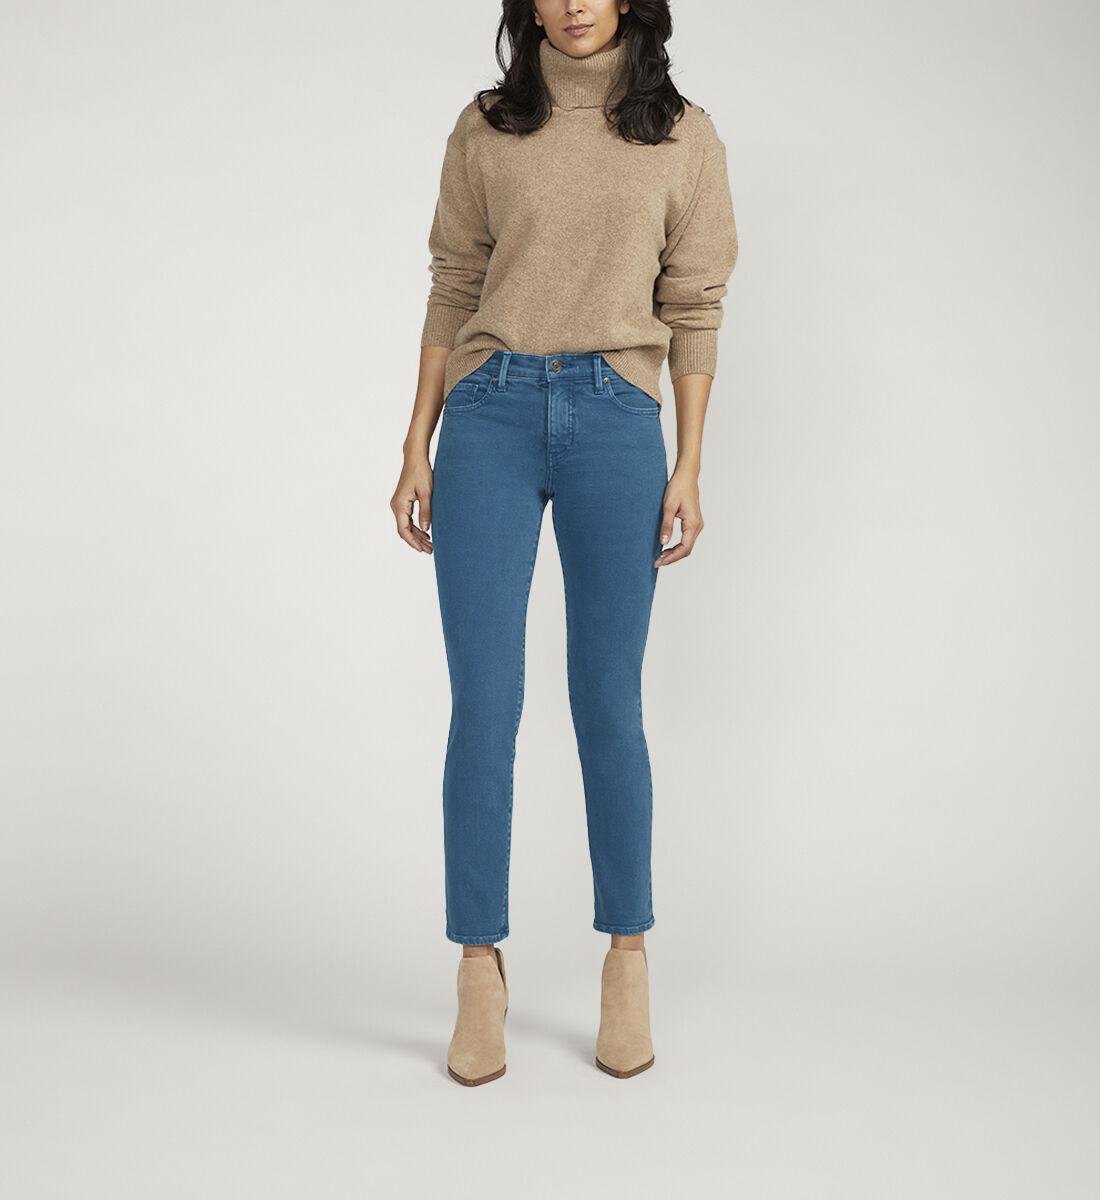 Buy Cassie Mid Rise Slim Straight Leg Jeans for USD 46.00 | Jag